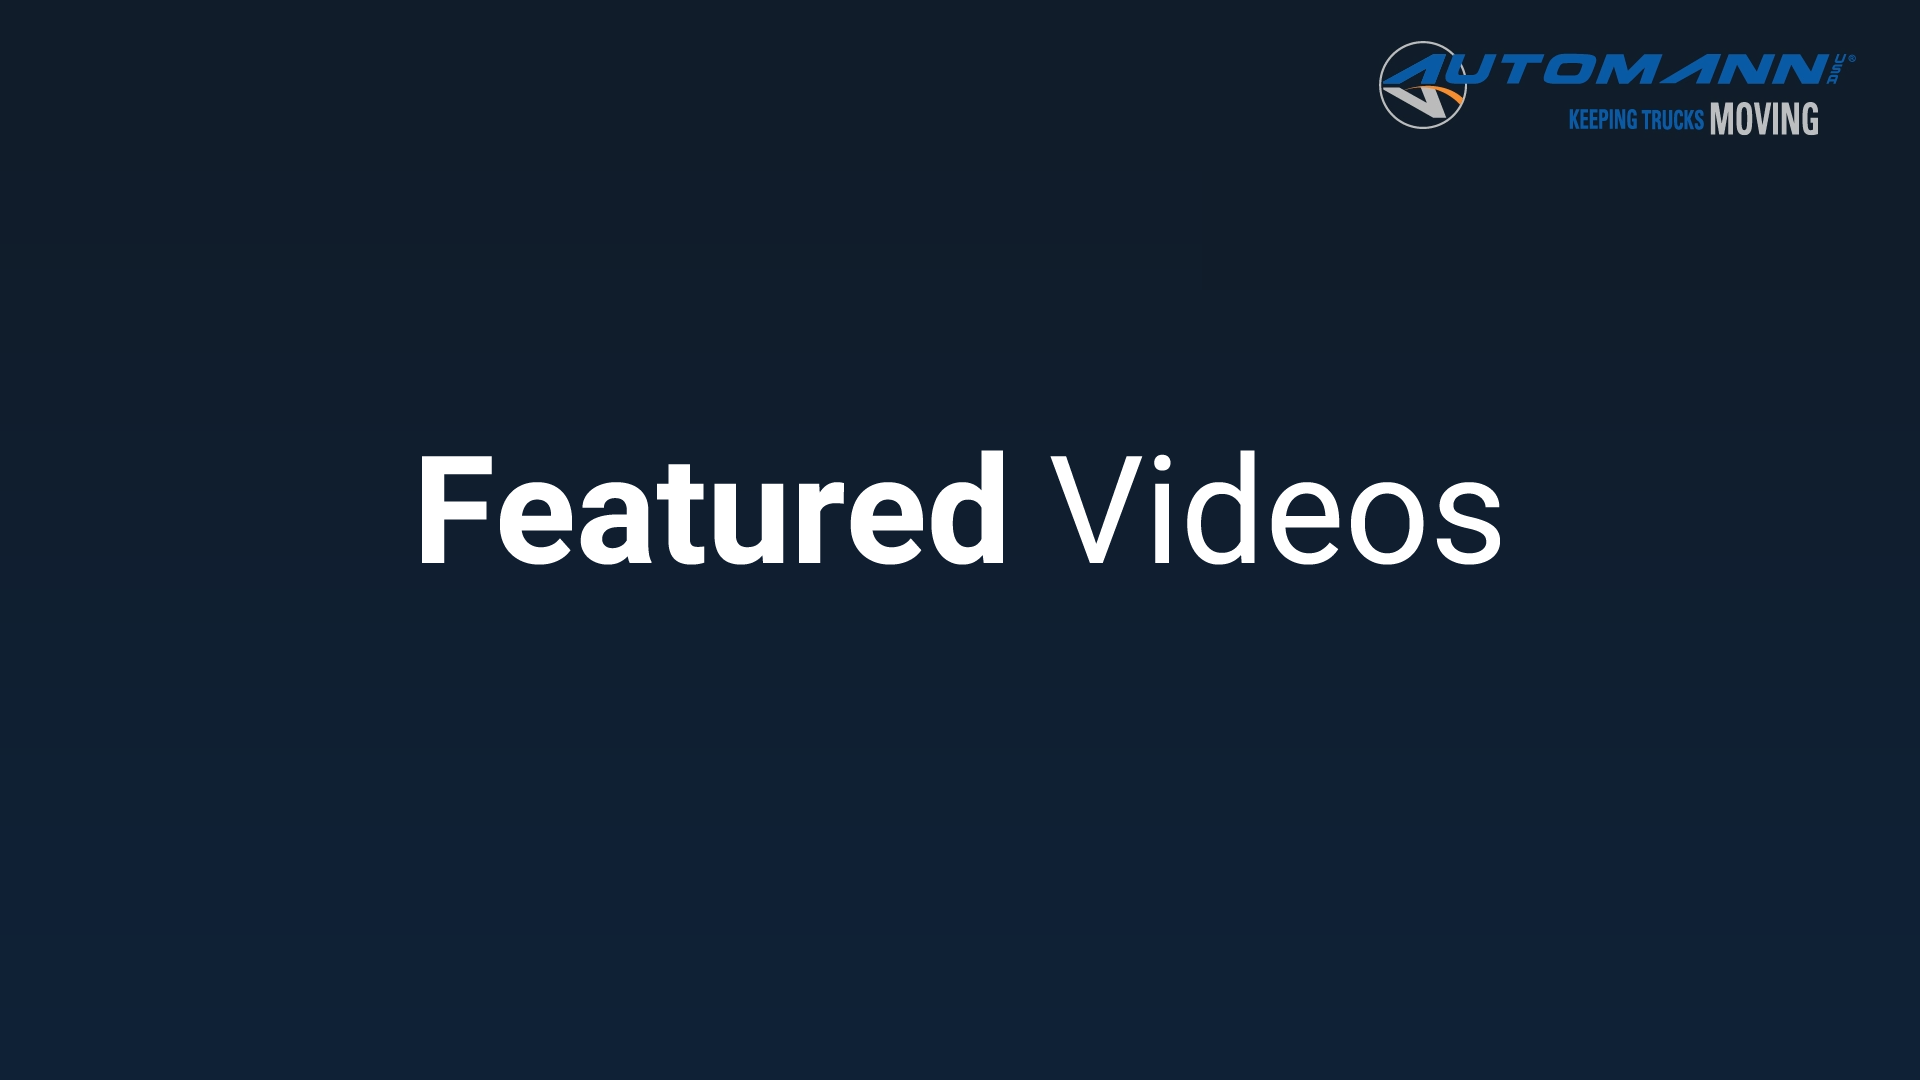 Featured Videos